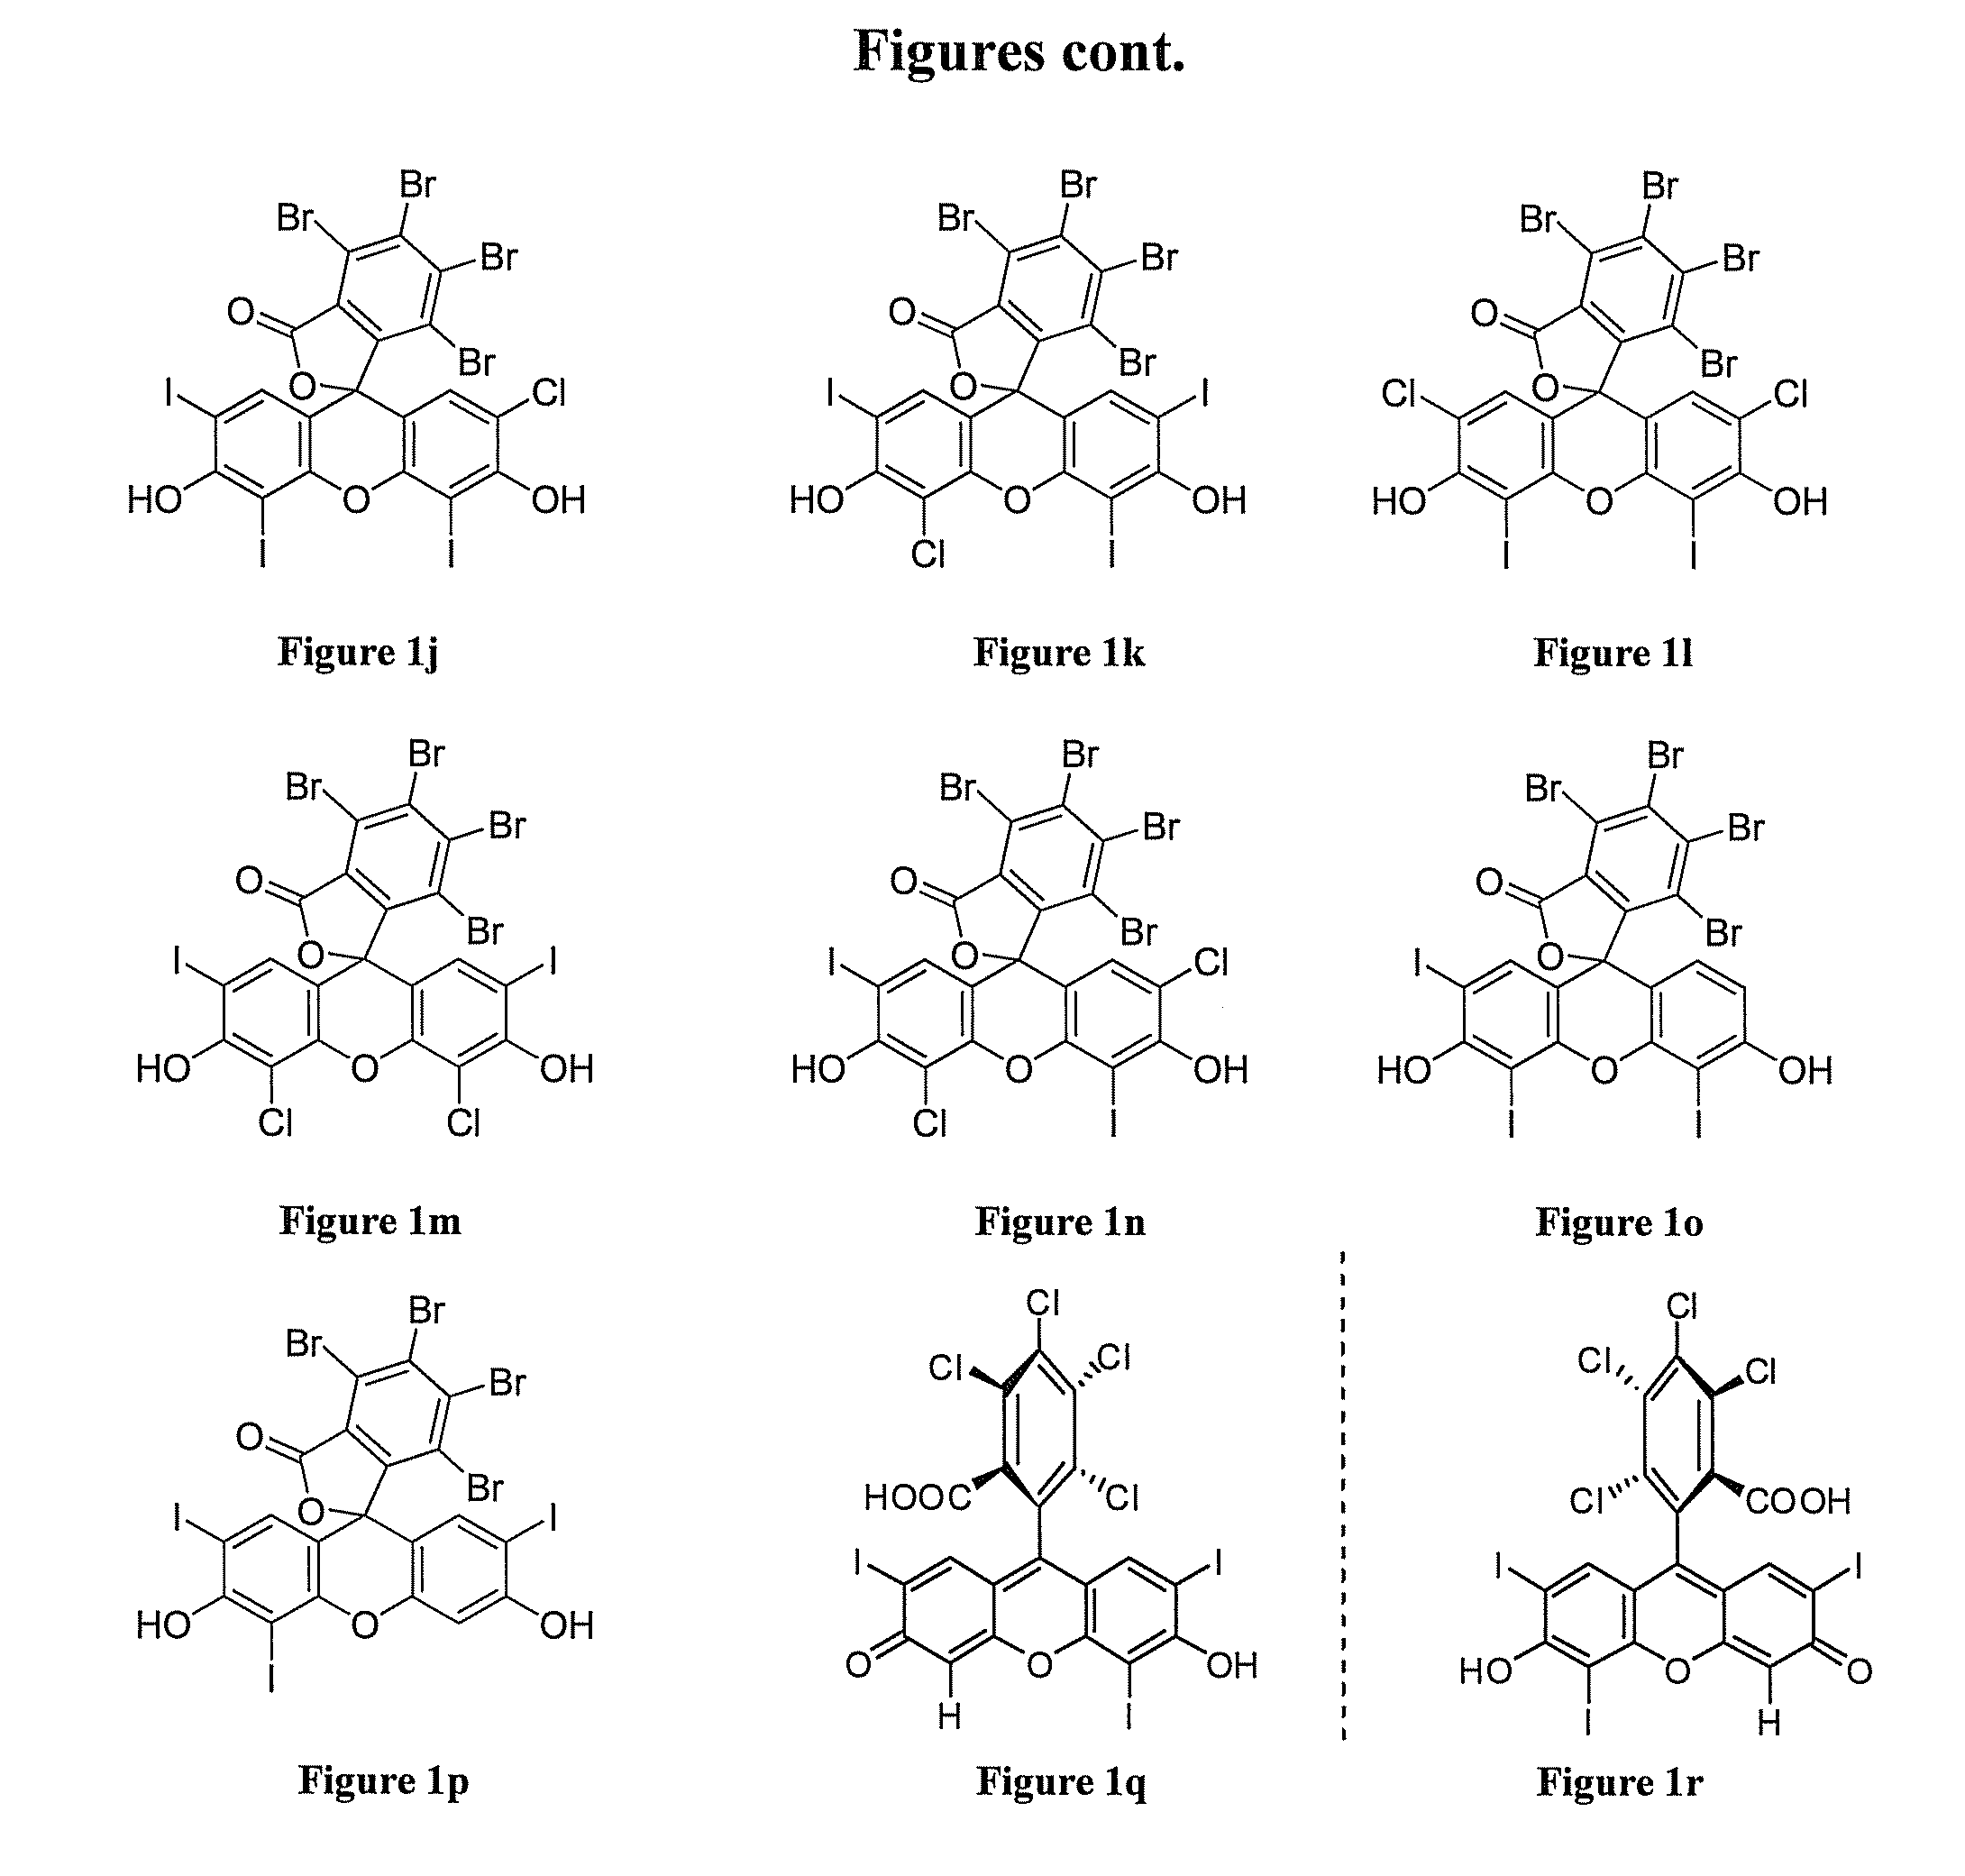 Process for the Synthesis of 4,5,6,7-tetrachloro-3',6'-dihydroxy-2',4',5',7'-tetraiodo-3H-spiro[isobenzofuran-1,9'-xanthen]-3-one (Rose Bengal) and Related Xanthenes